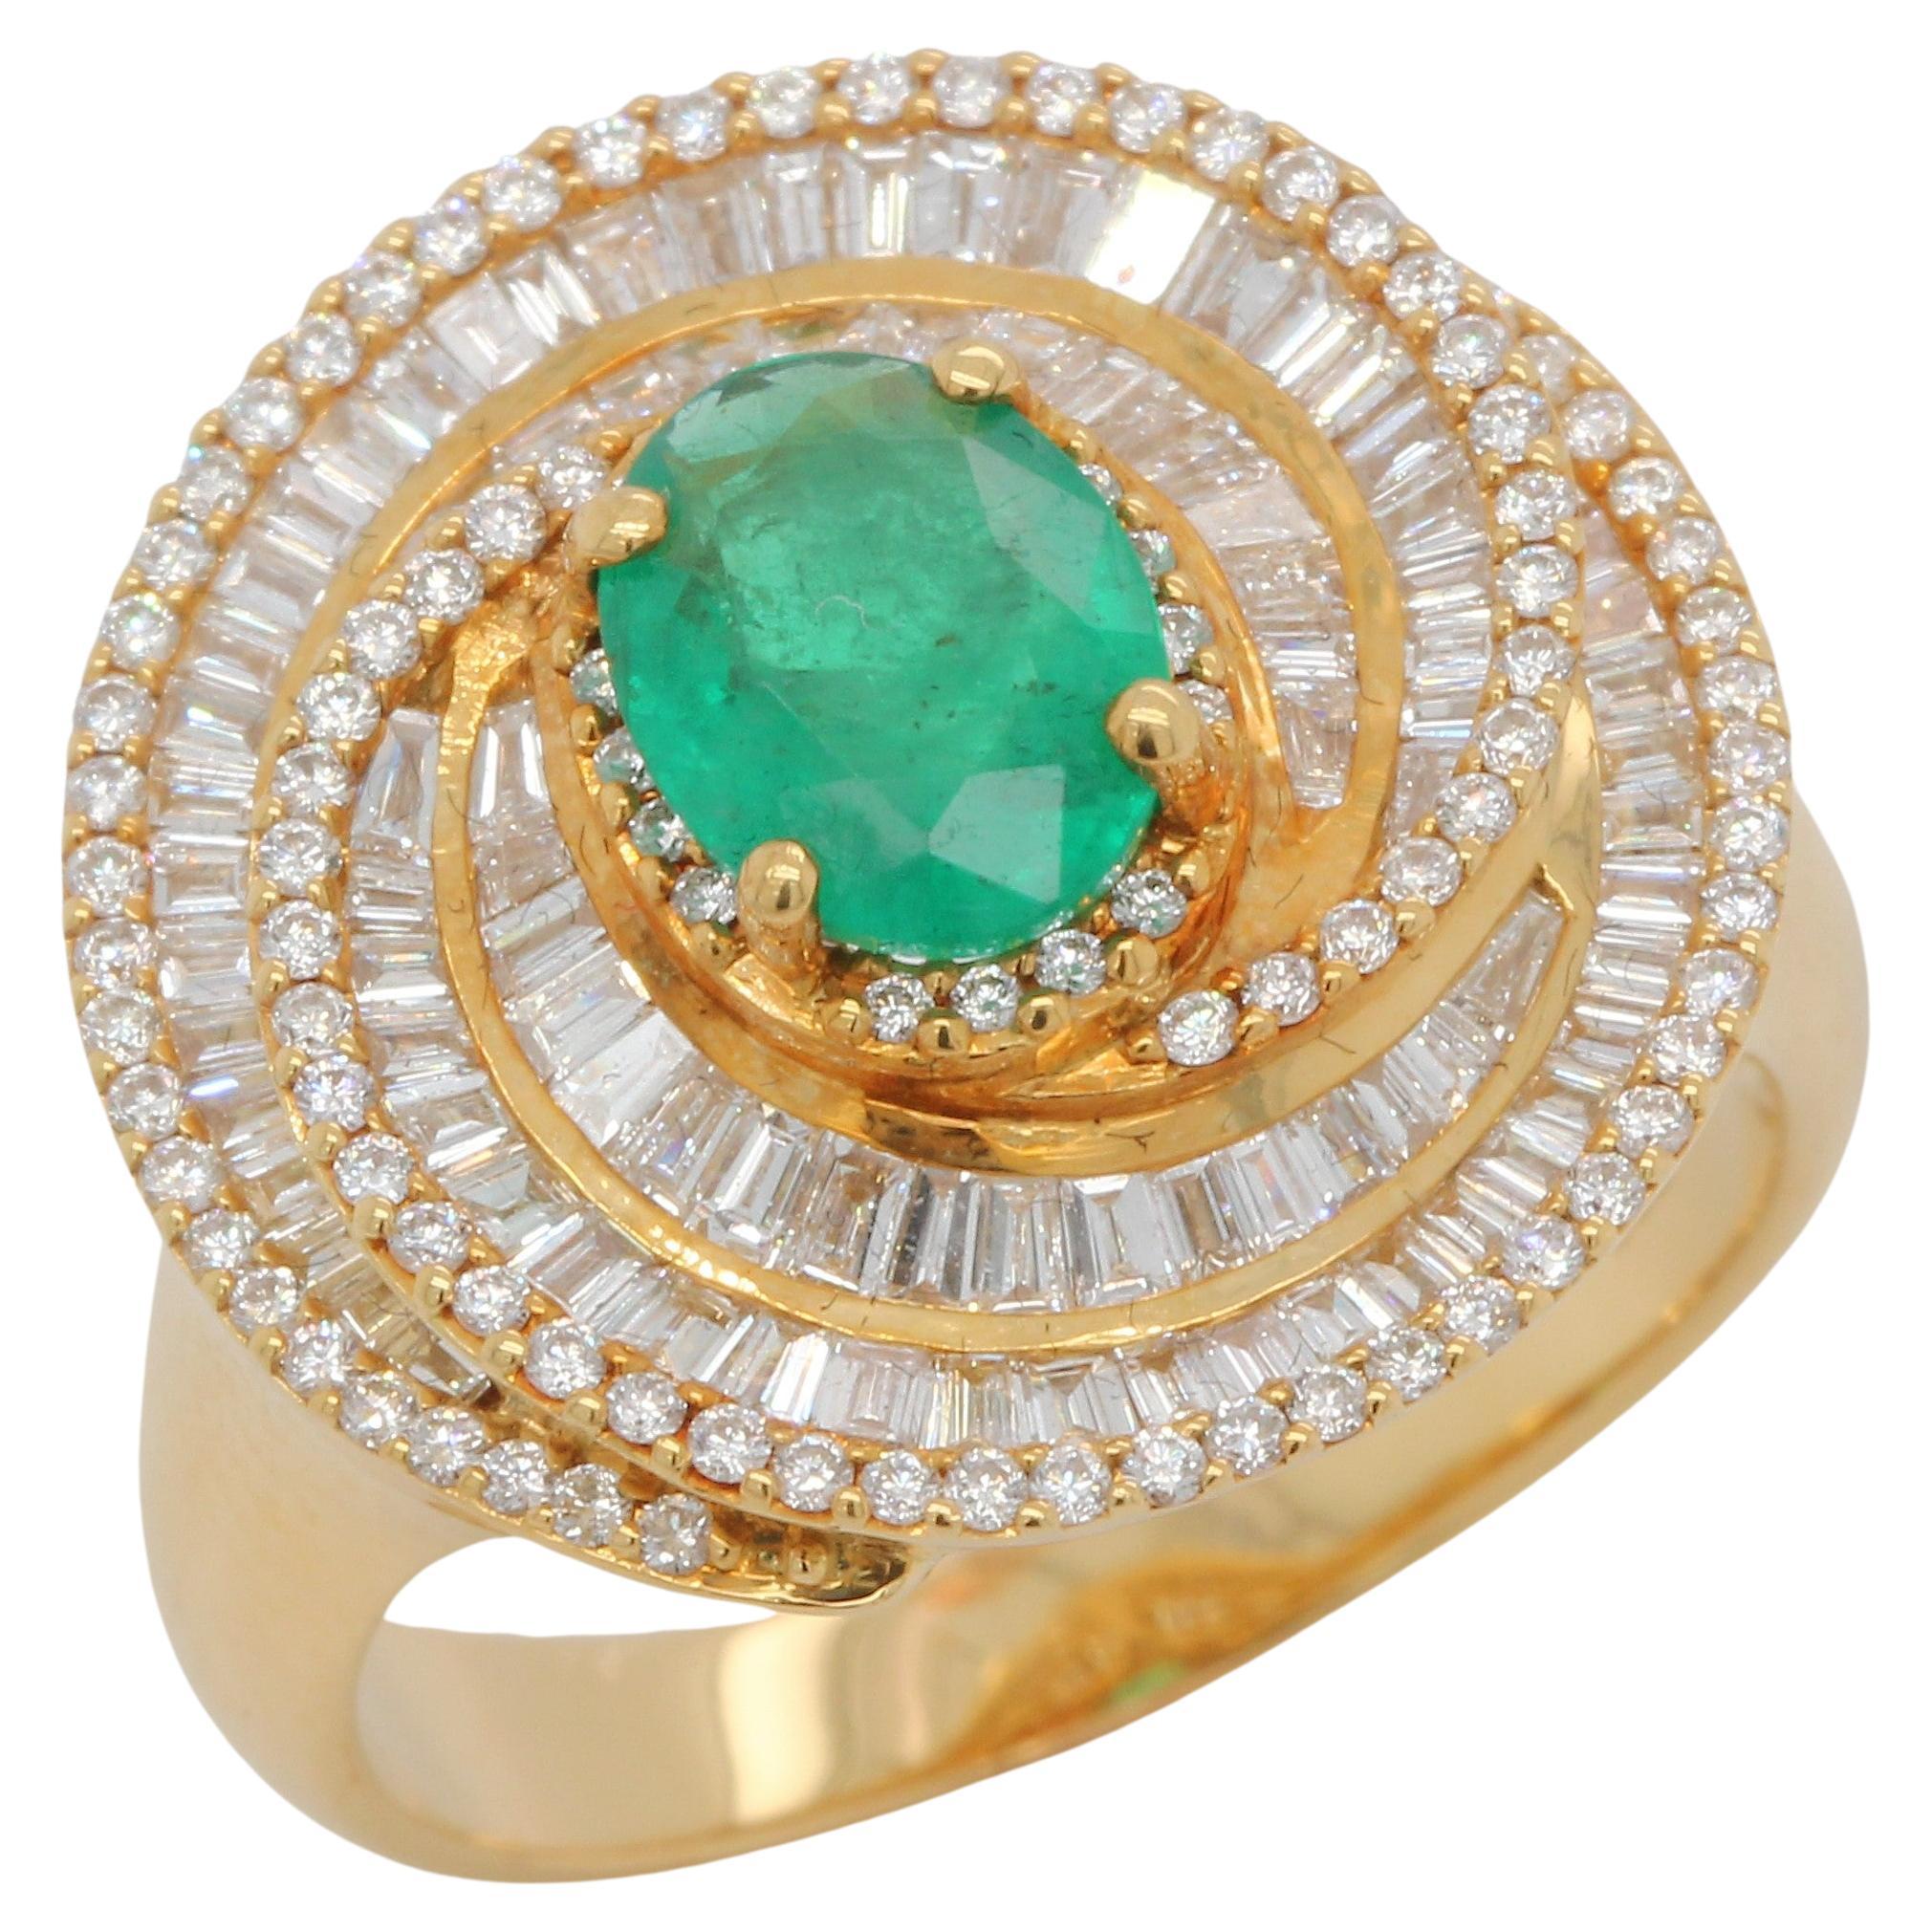 0.89 Carat Emerald and Diamond Ring in 18 Karat Gold For Sale